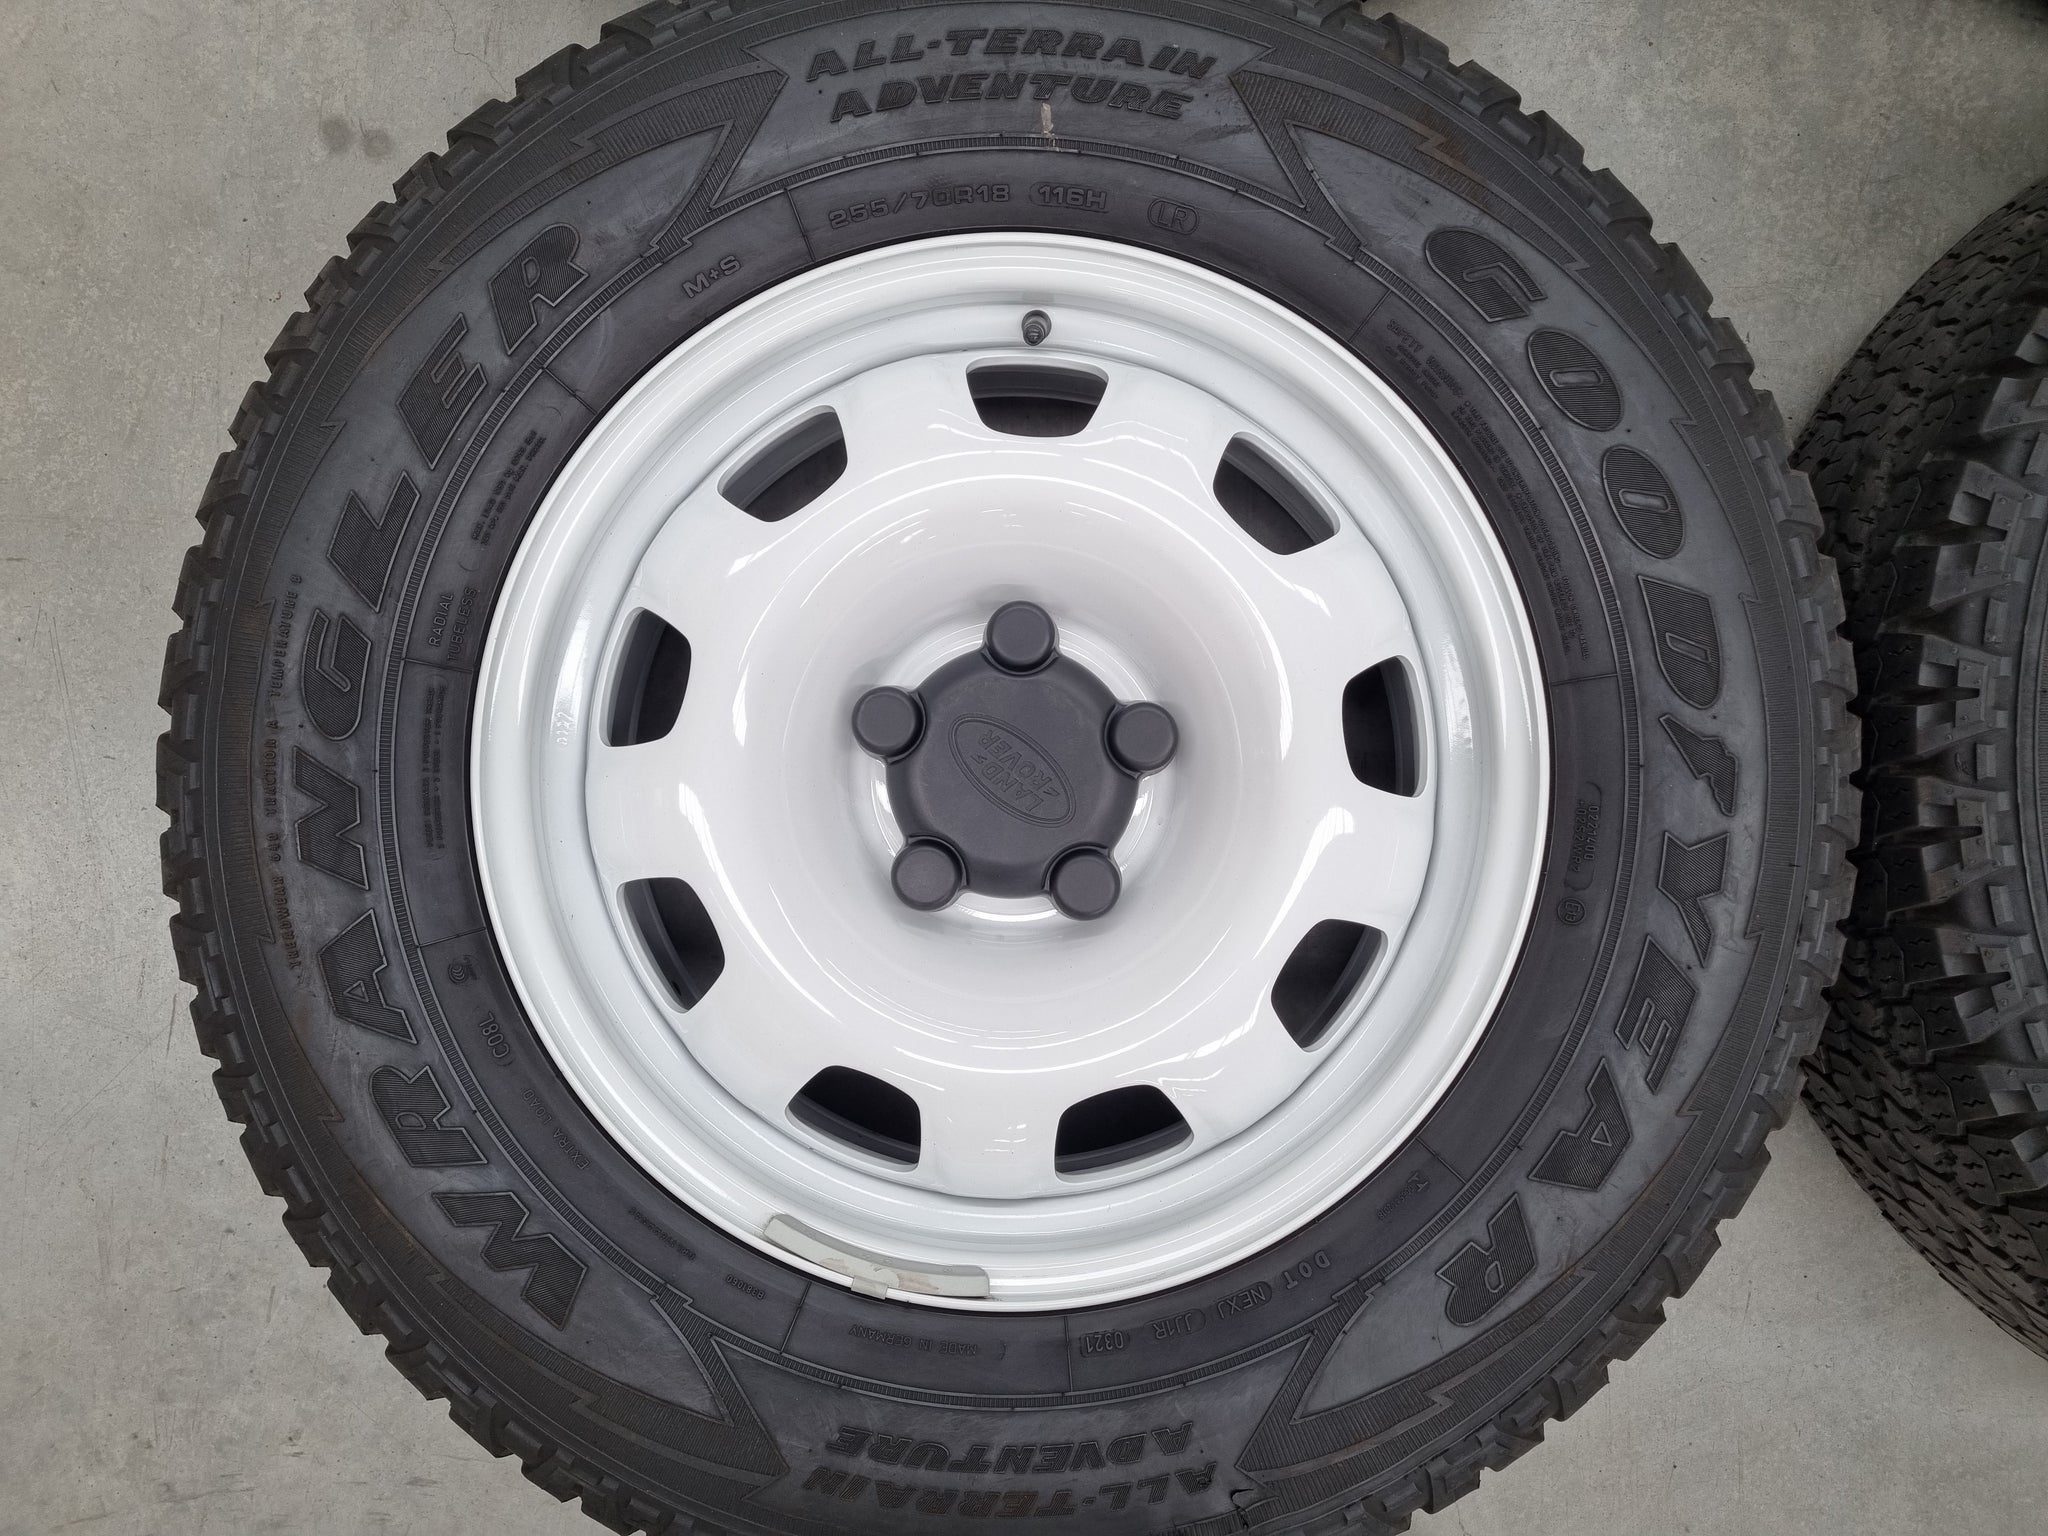 Load image into Gallery viewer, Genuine Land Rover Defender L663 Steel White 18 Inch Wheels and Tyres Set of 5
